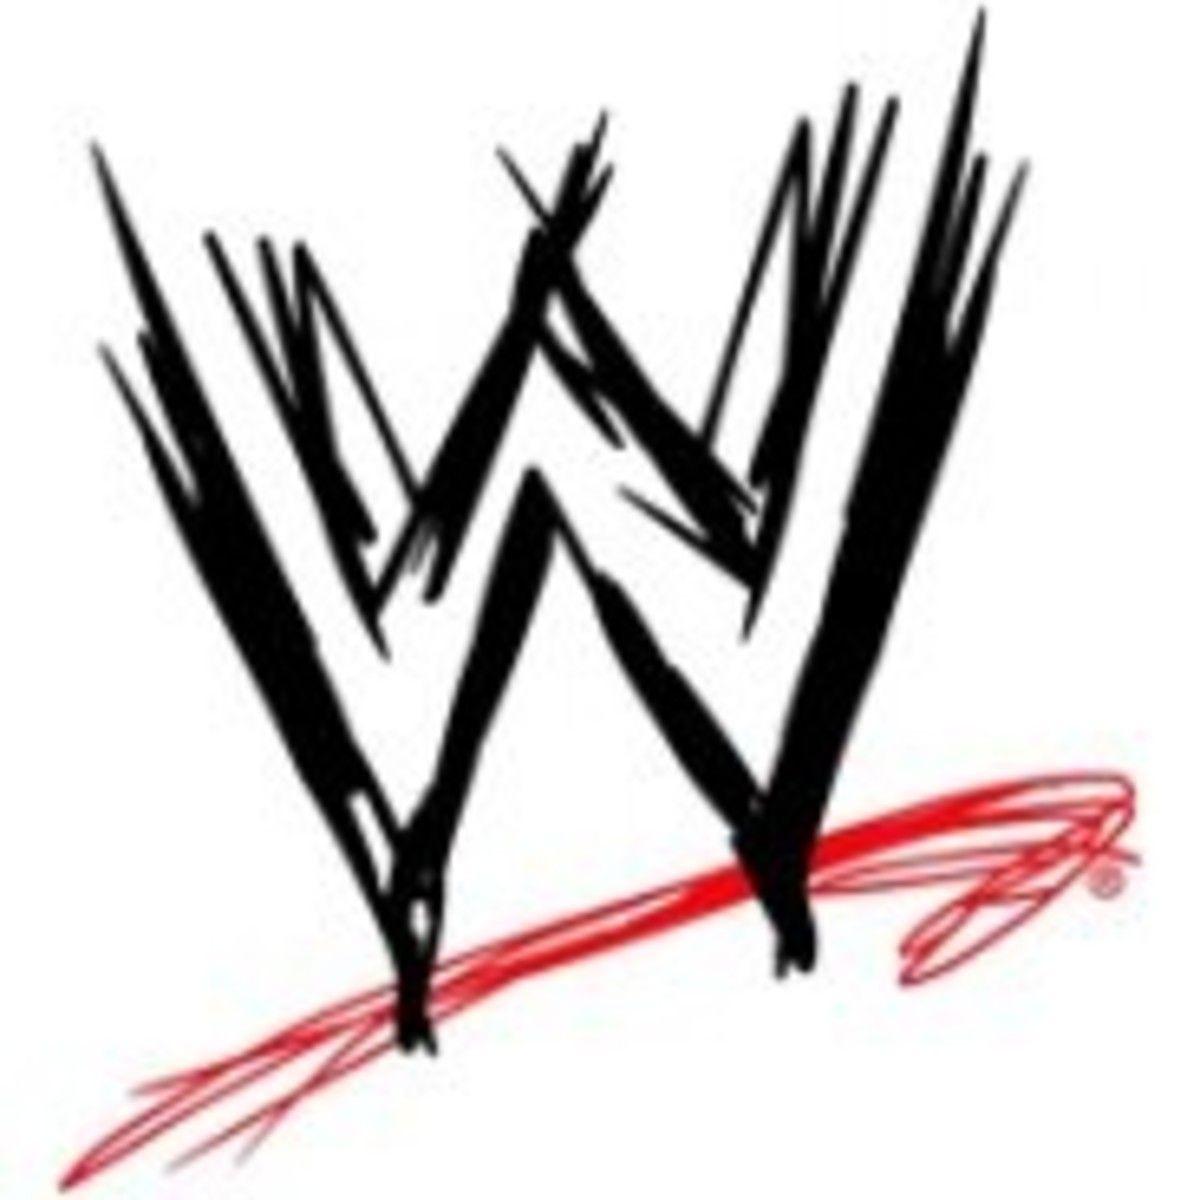 Small WWE Logo - SPORTS MONTH: WWE reports Q2 figures - Licensing.biz